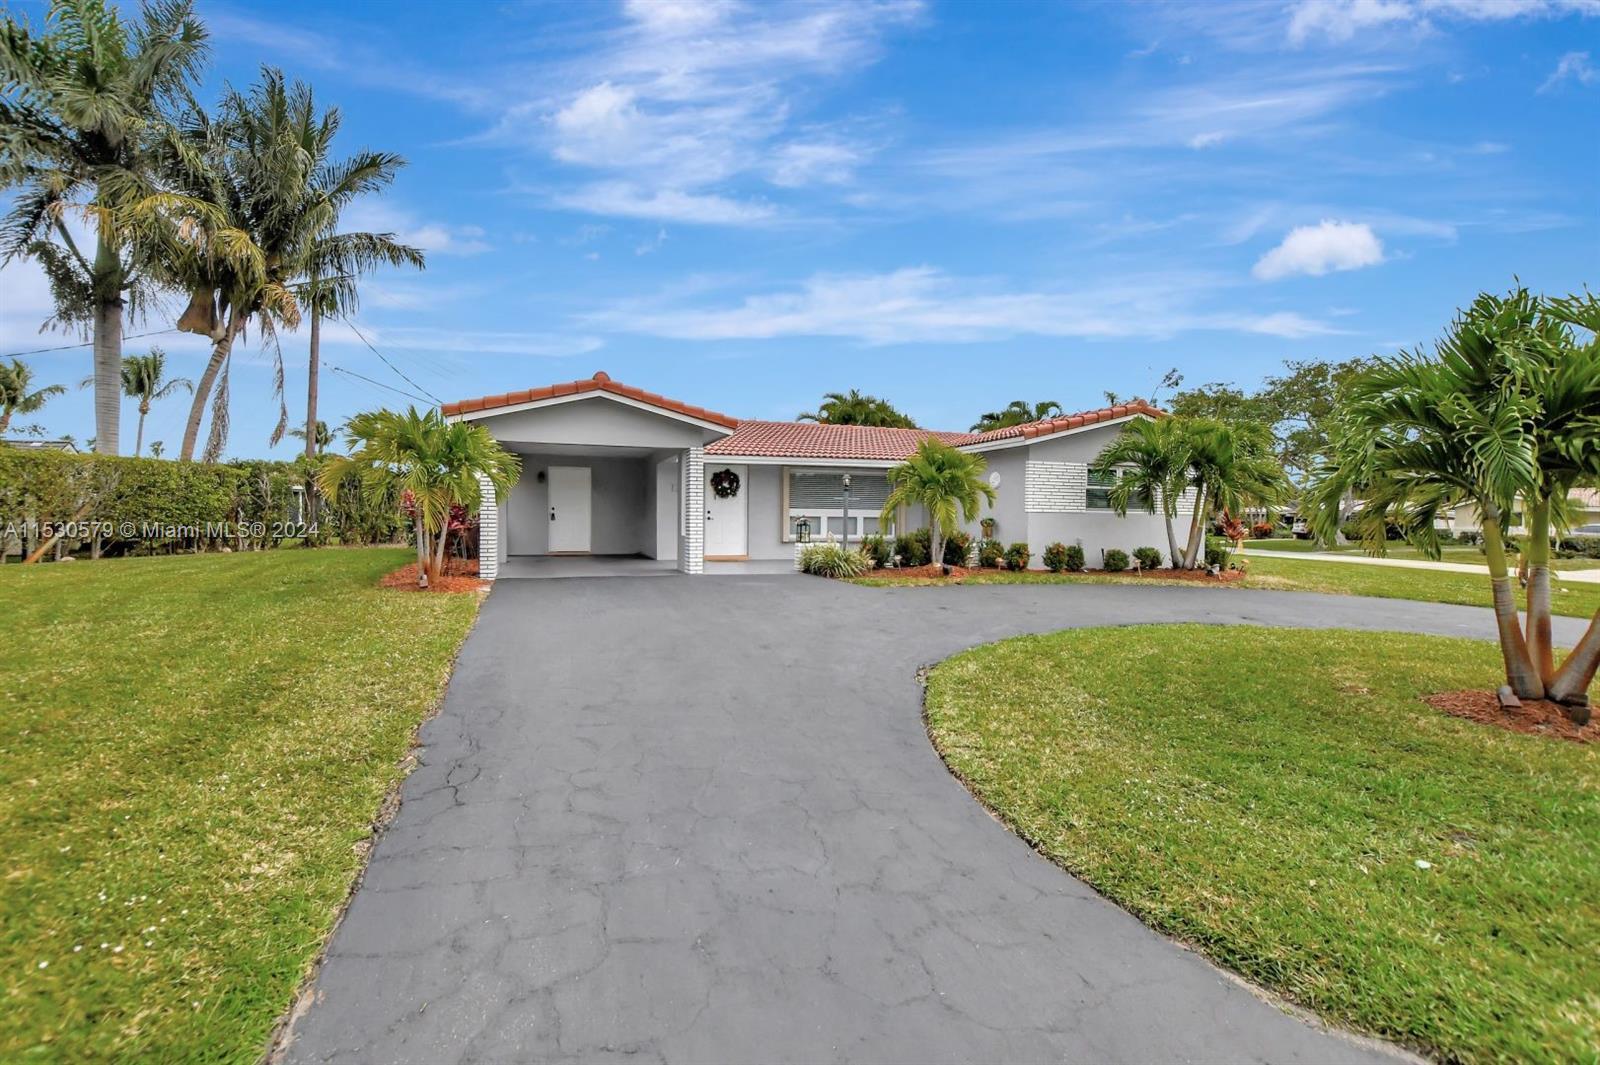 Renovated home in the prestigious and sought after community of Boca Islands. Literally surrounded b